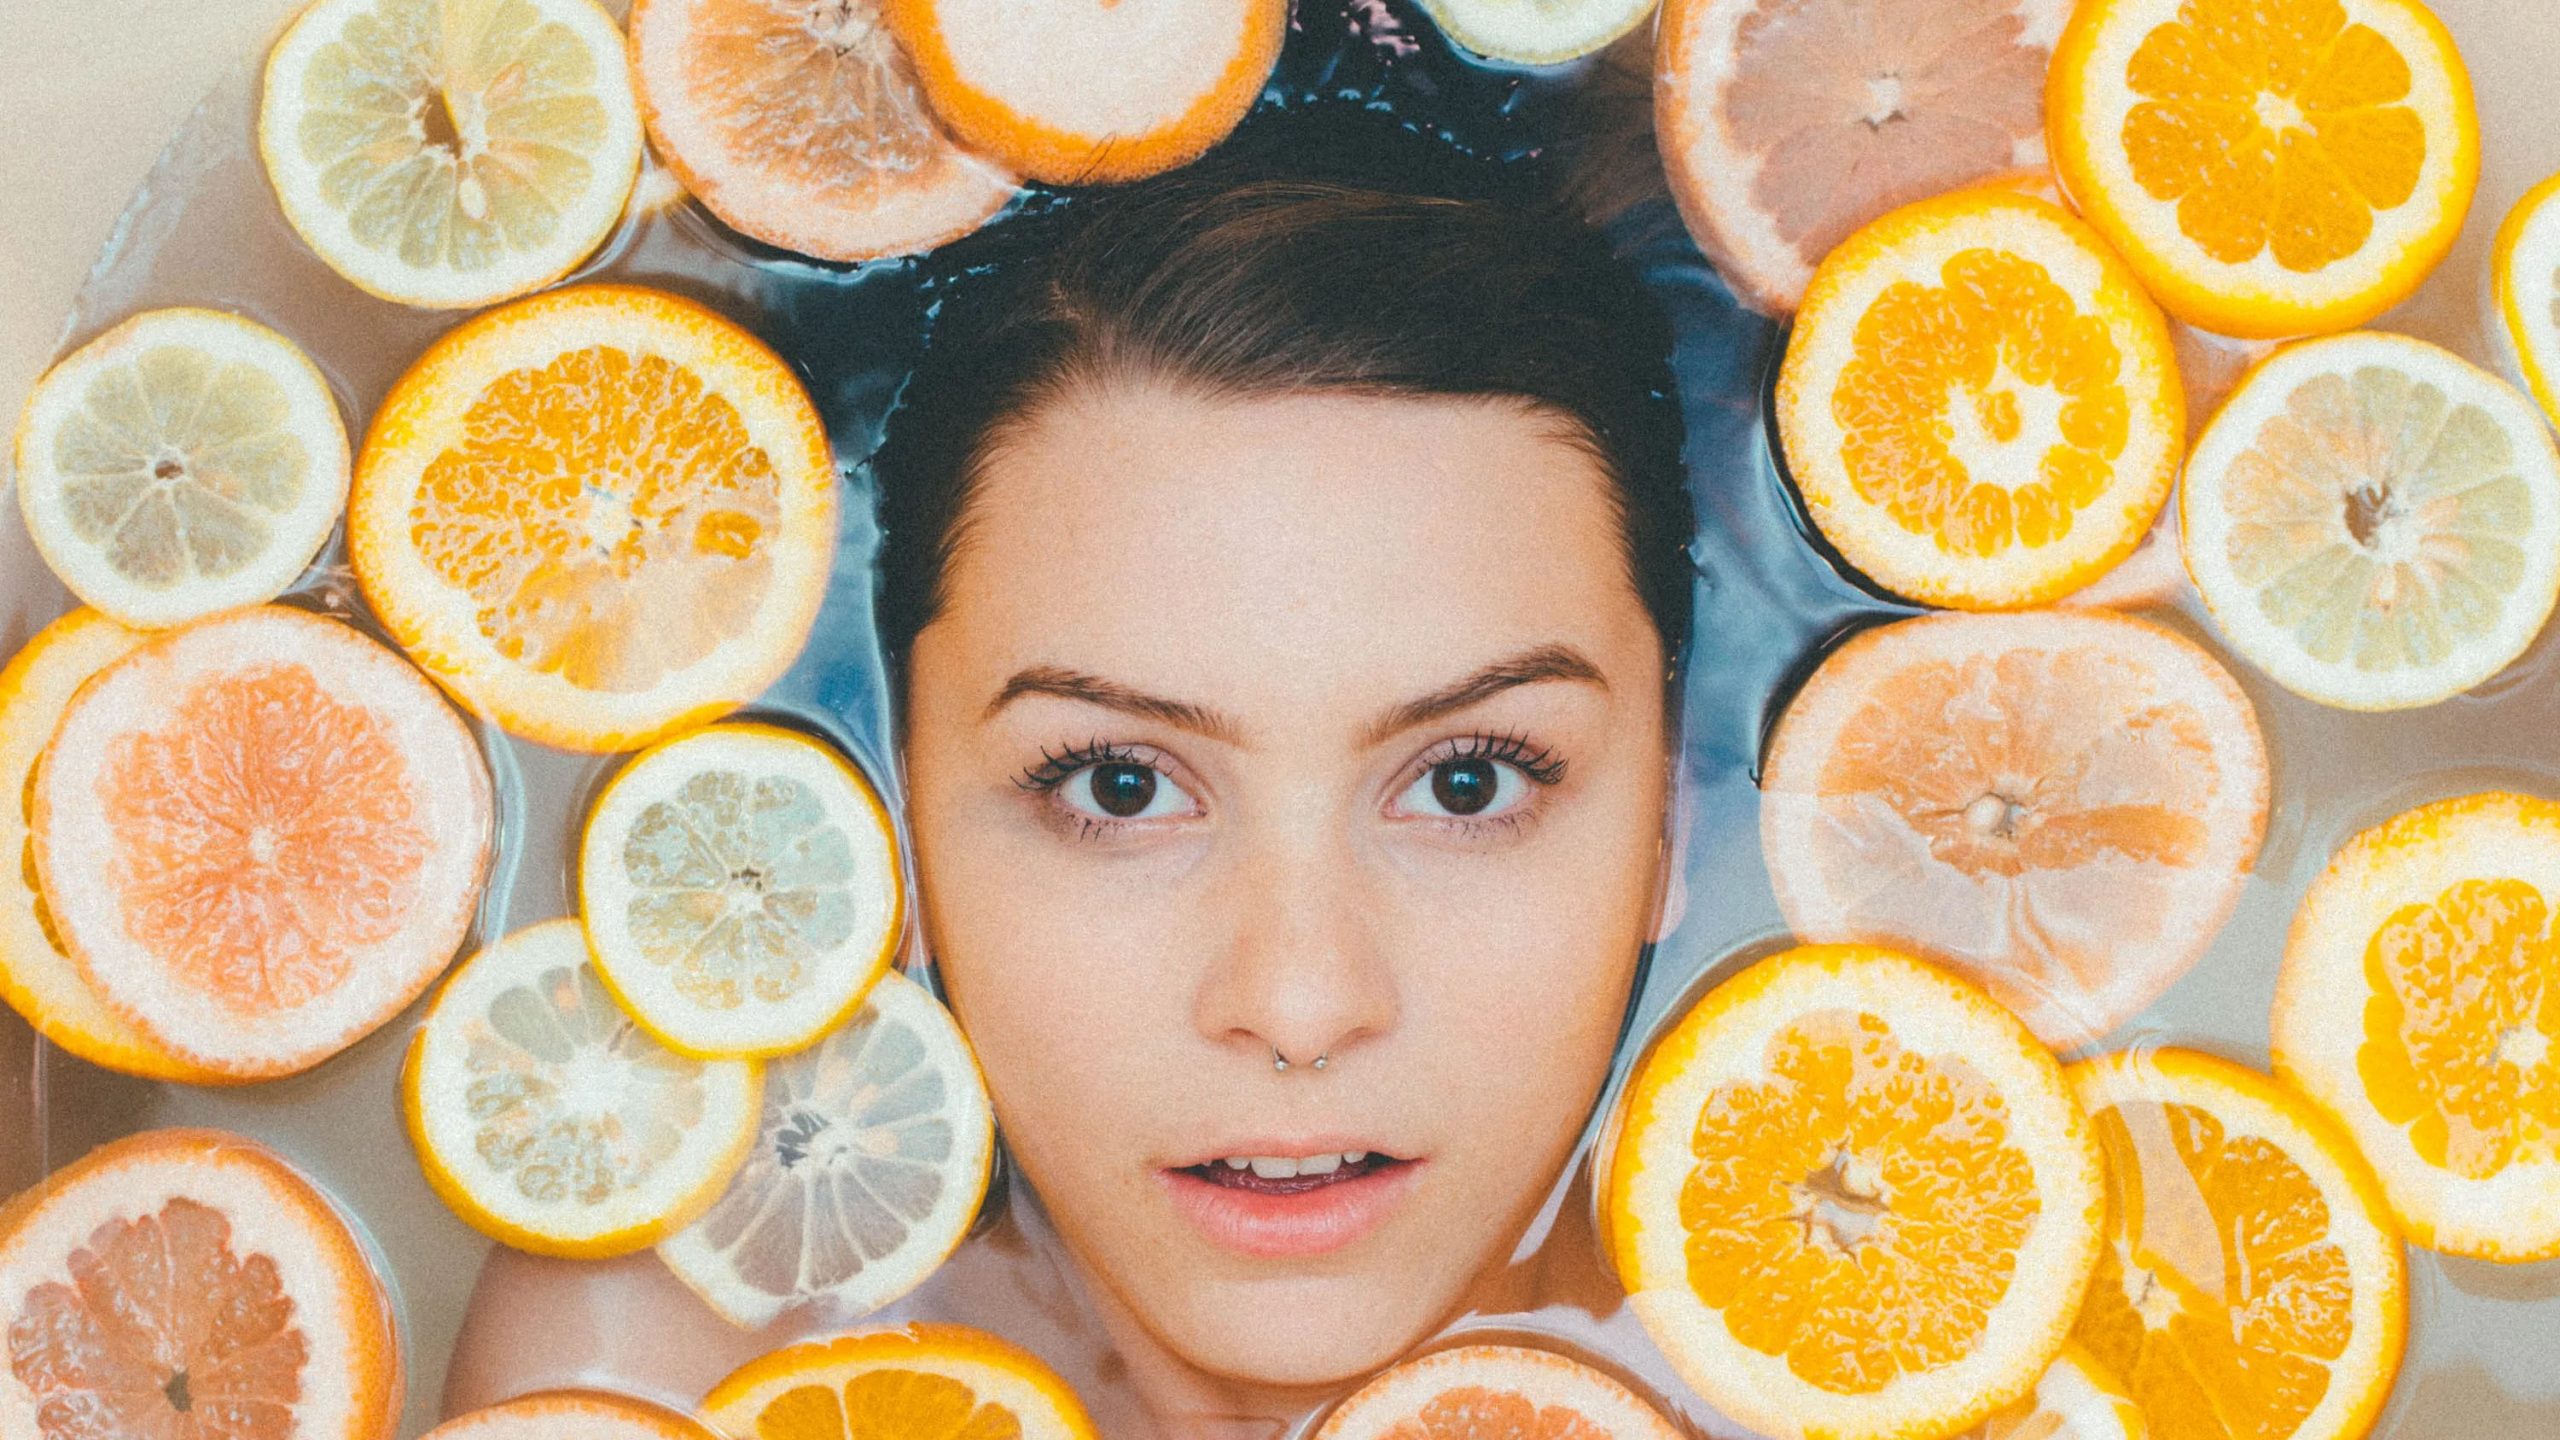 Fruit face packs that work wonders for acne